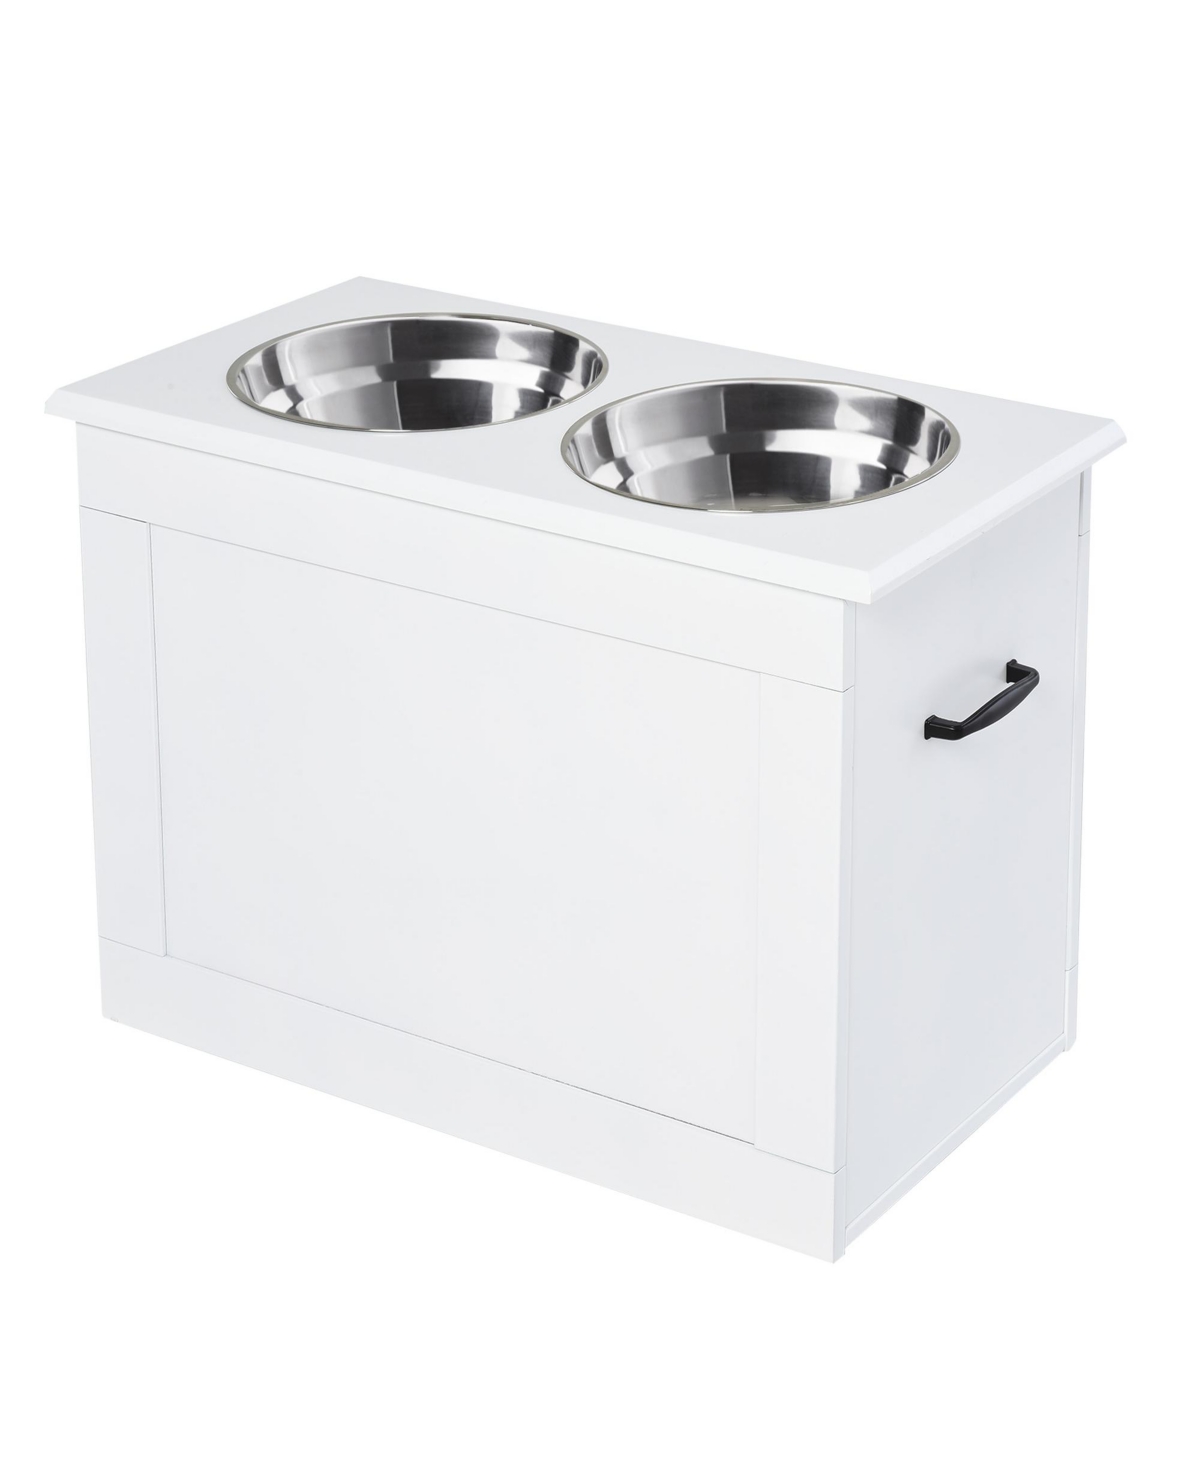 Stainless Steel Raised Pet Bowl Feeding Station with Storage - White